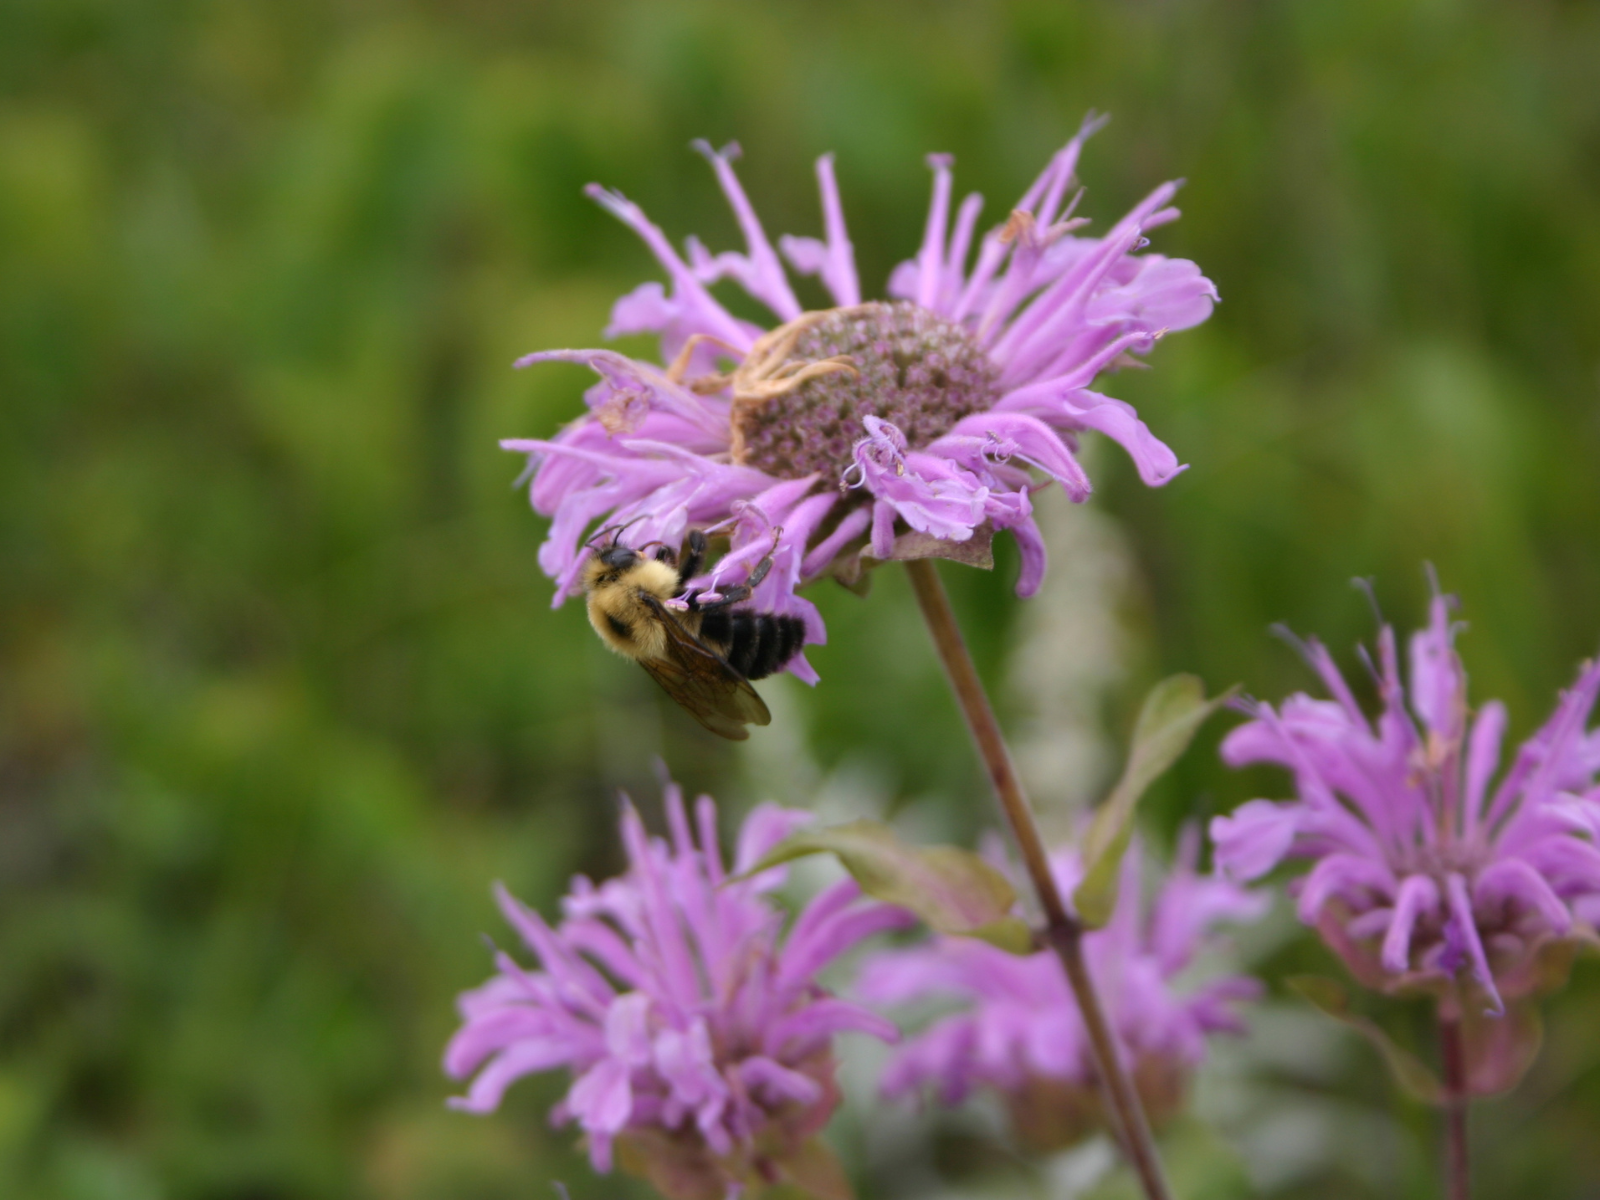 A fluffy yellow and black bumble bee crawling along the fringed edge of a purple bergamot flower.